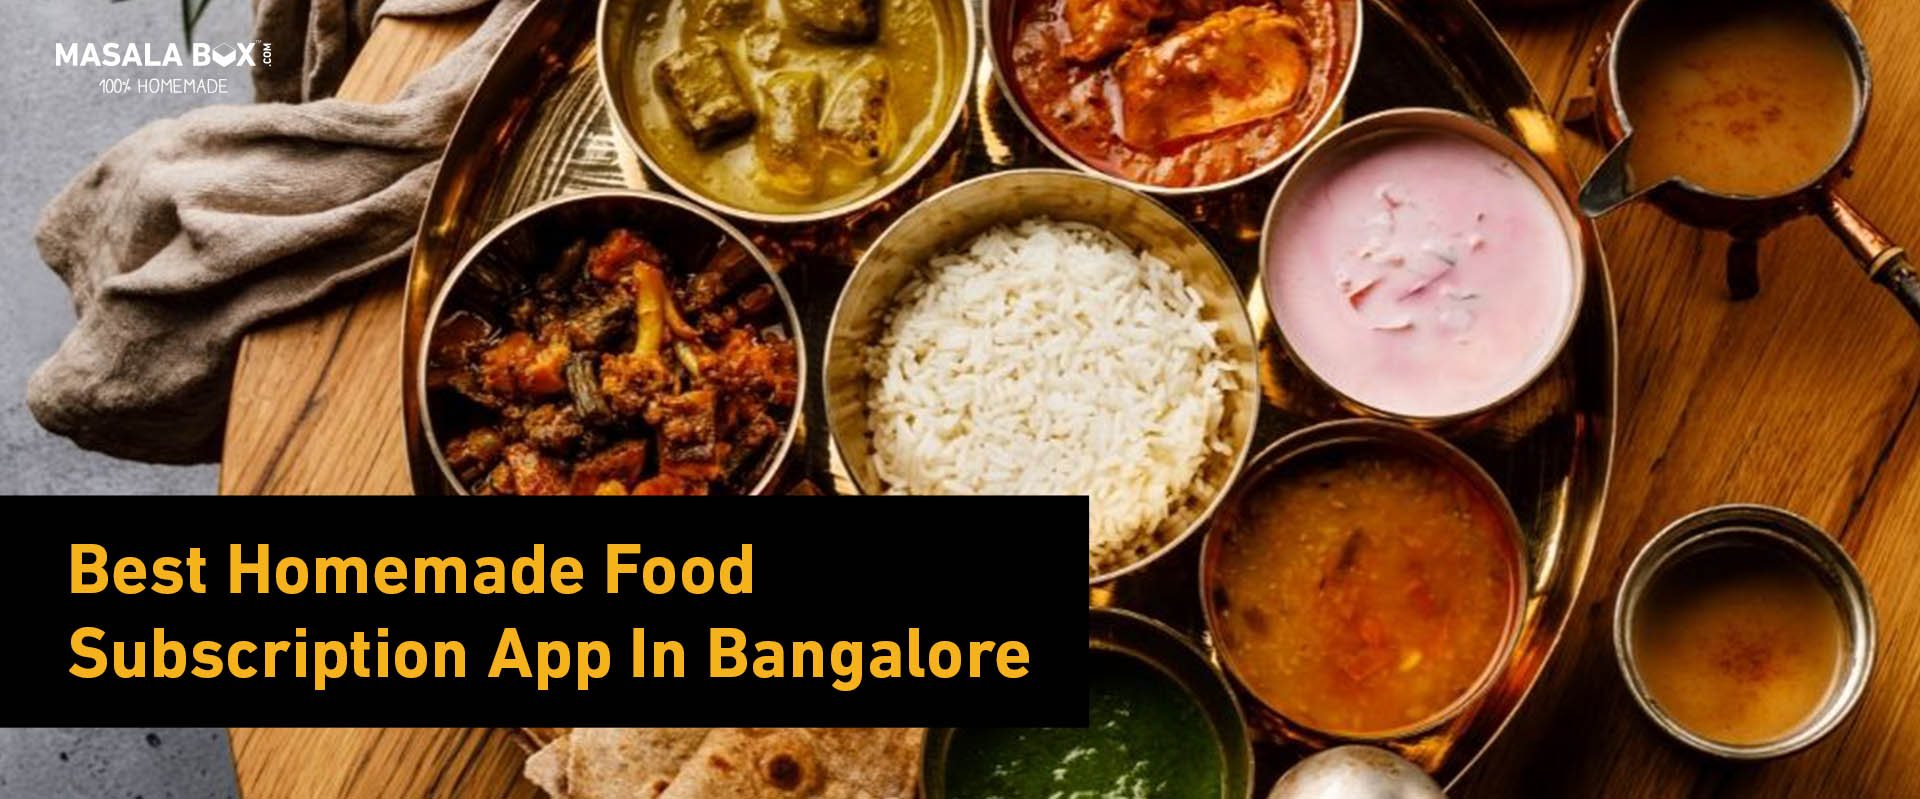 Order Food Subscription Service in Bangalore